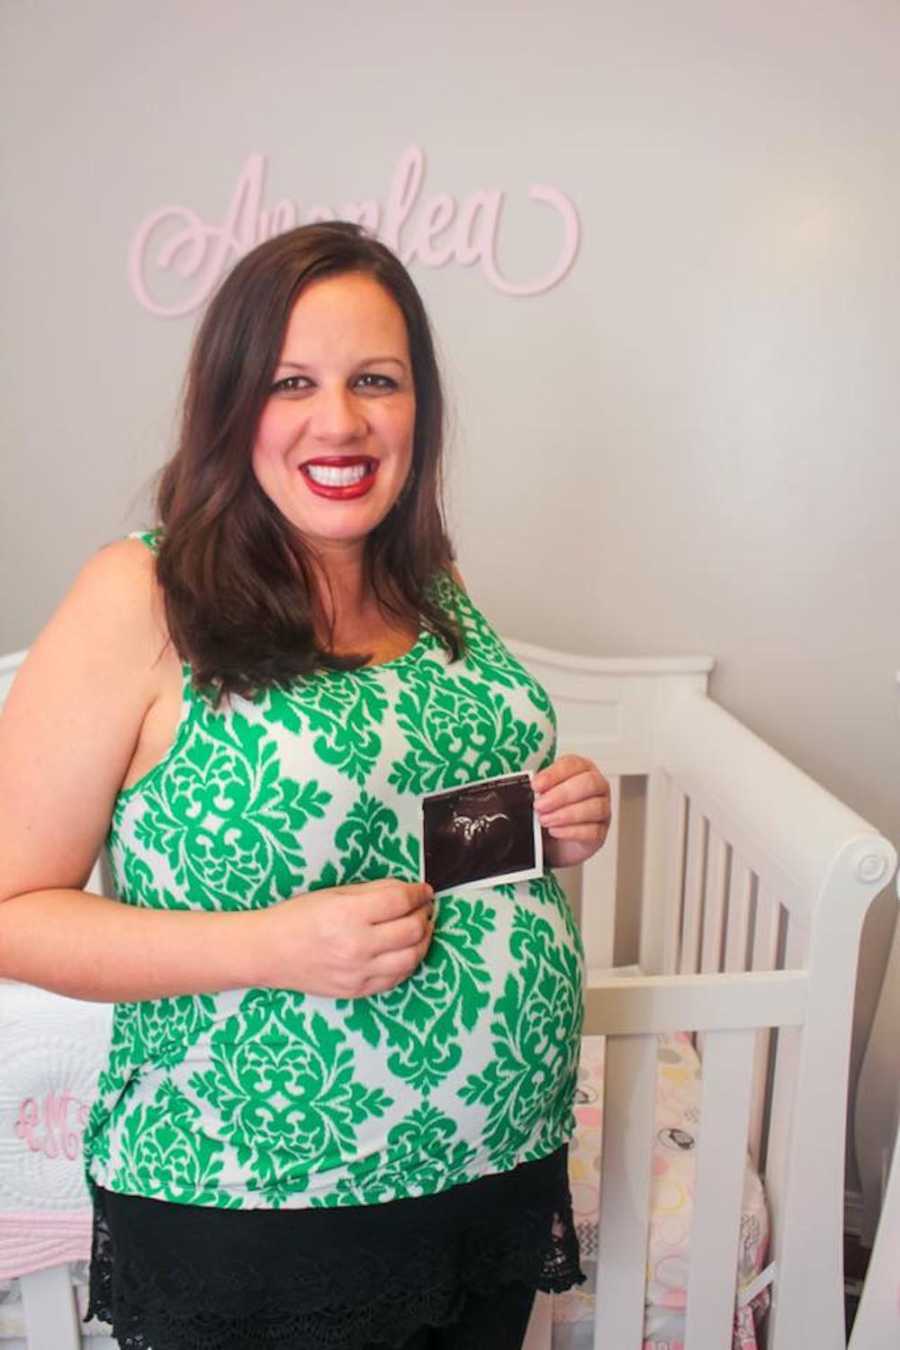 Pregnant woman standing in front of crib holding ultrasound picture over her stomach